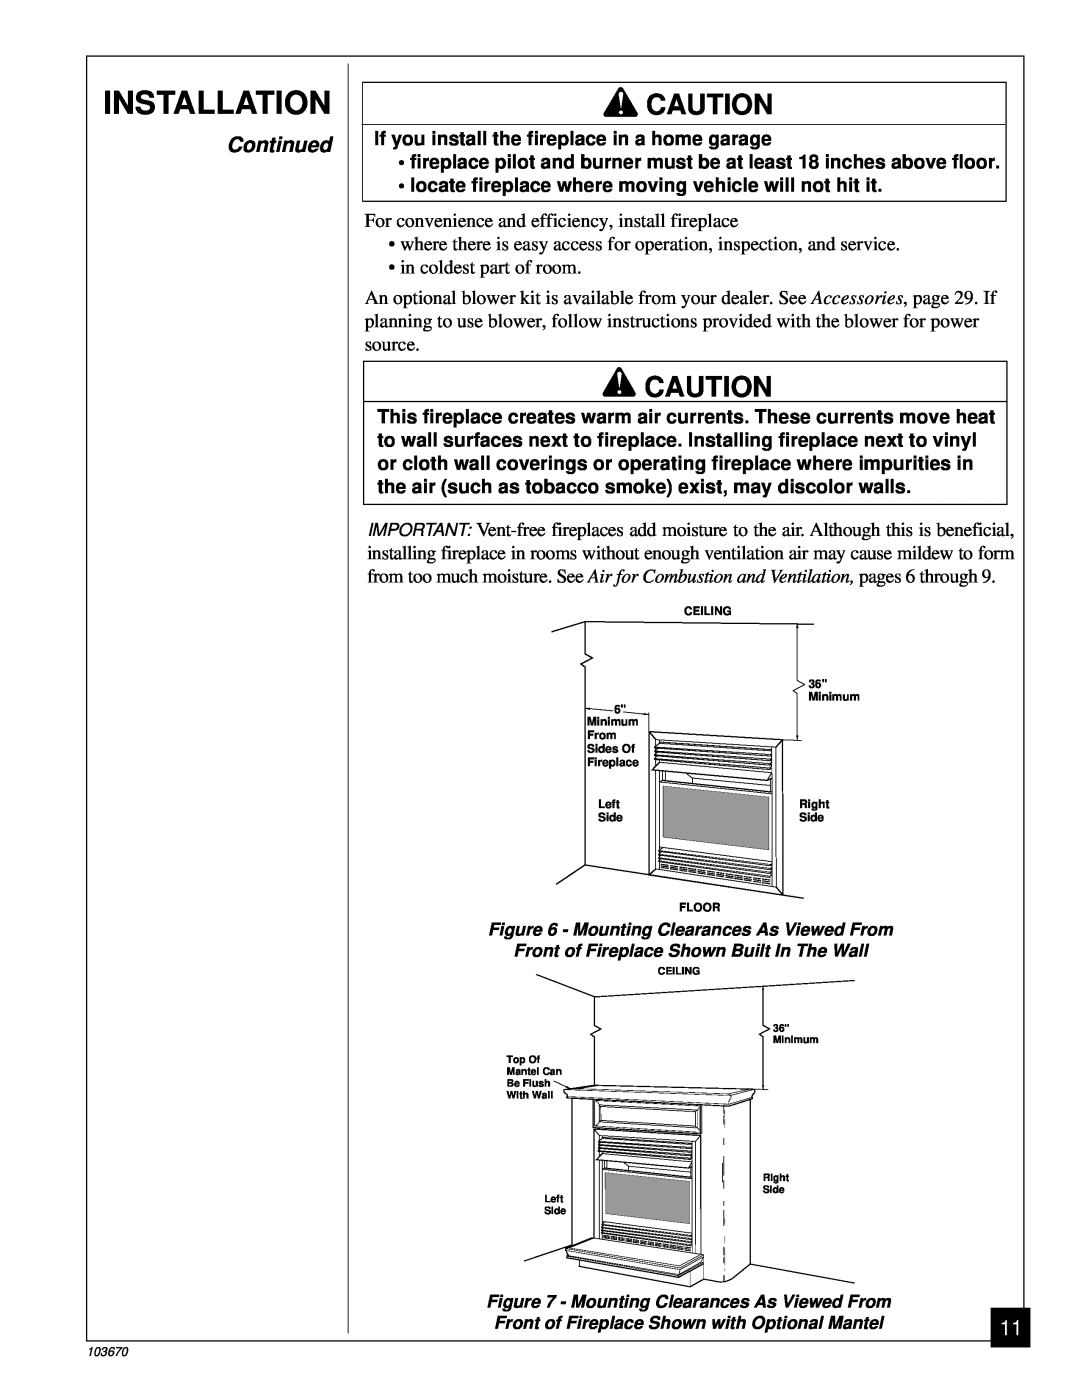 Vanguard Heating VMH10TN installation manual Installation, If you install the fireplace in a home garage, Continued 